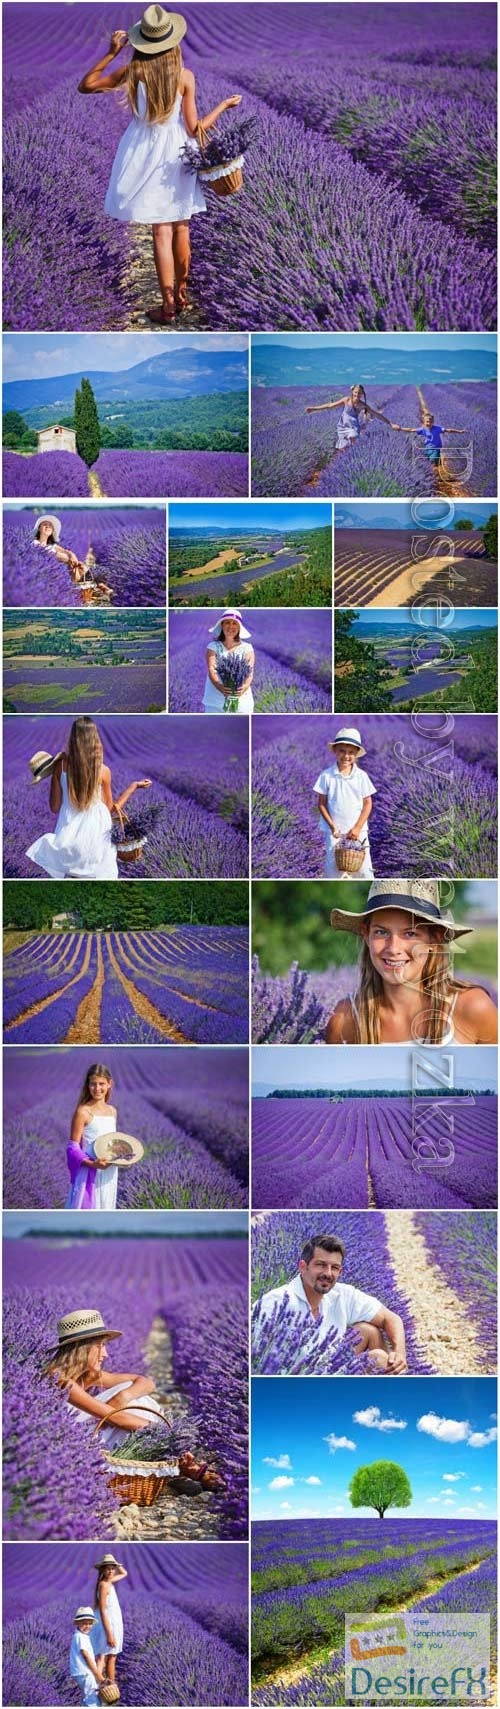 Wonderful fields with lavender, people and flowers stock photo